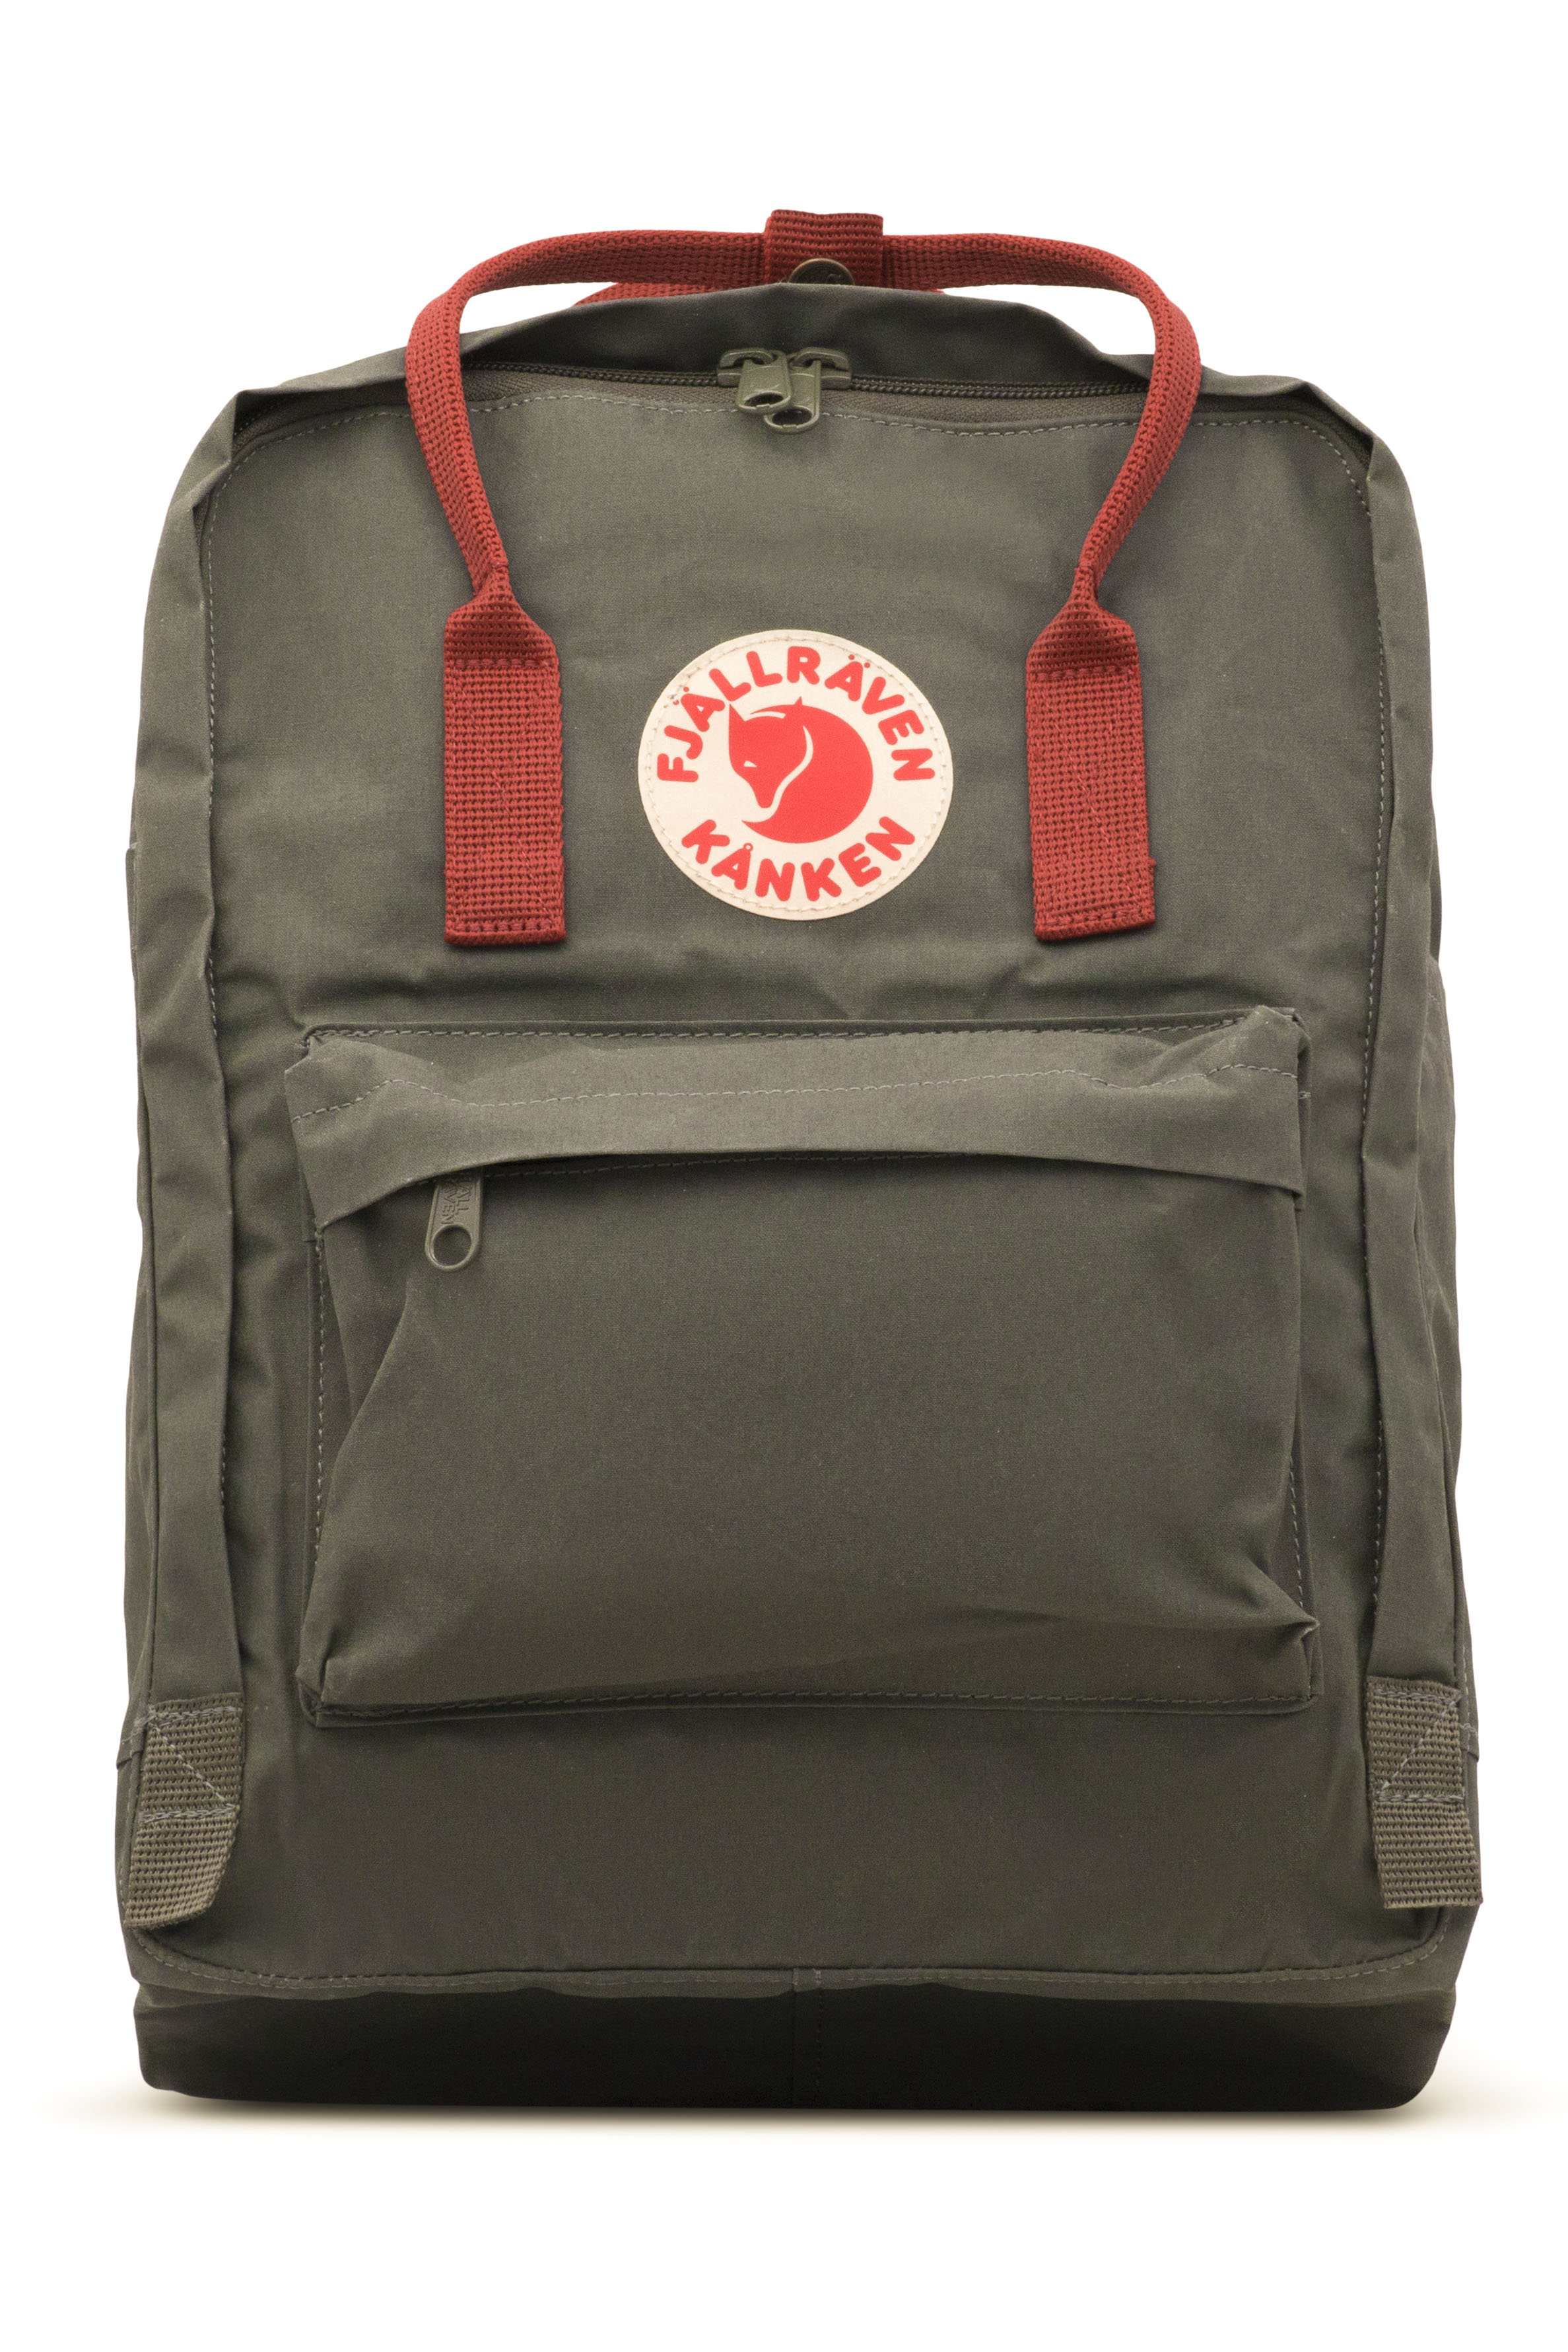 Fjallraven - Kanken Classic Backpack for Everyday - Forest Green/Ox Red